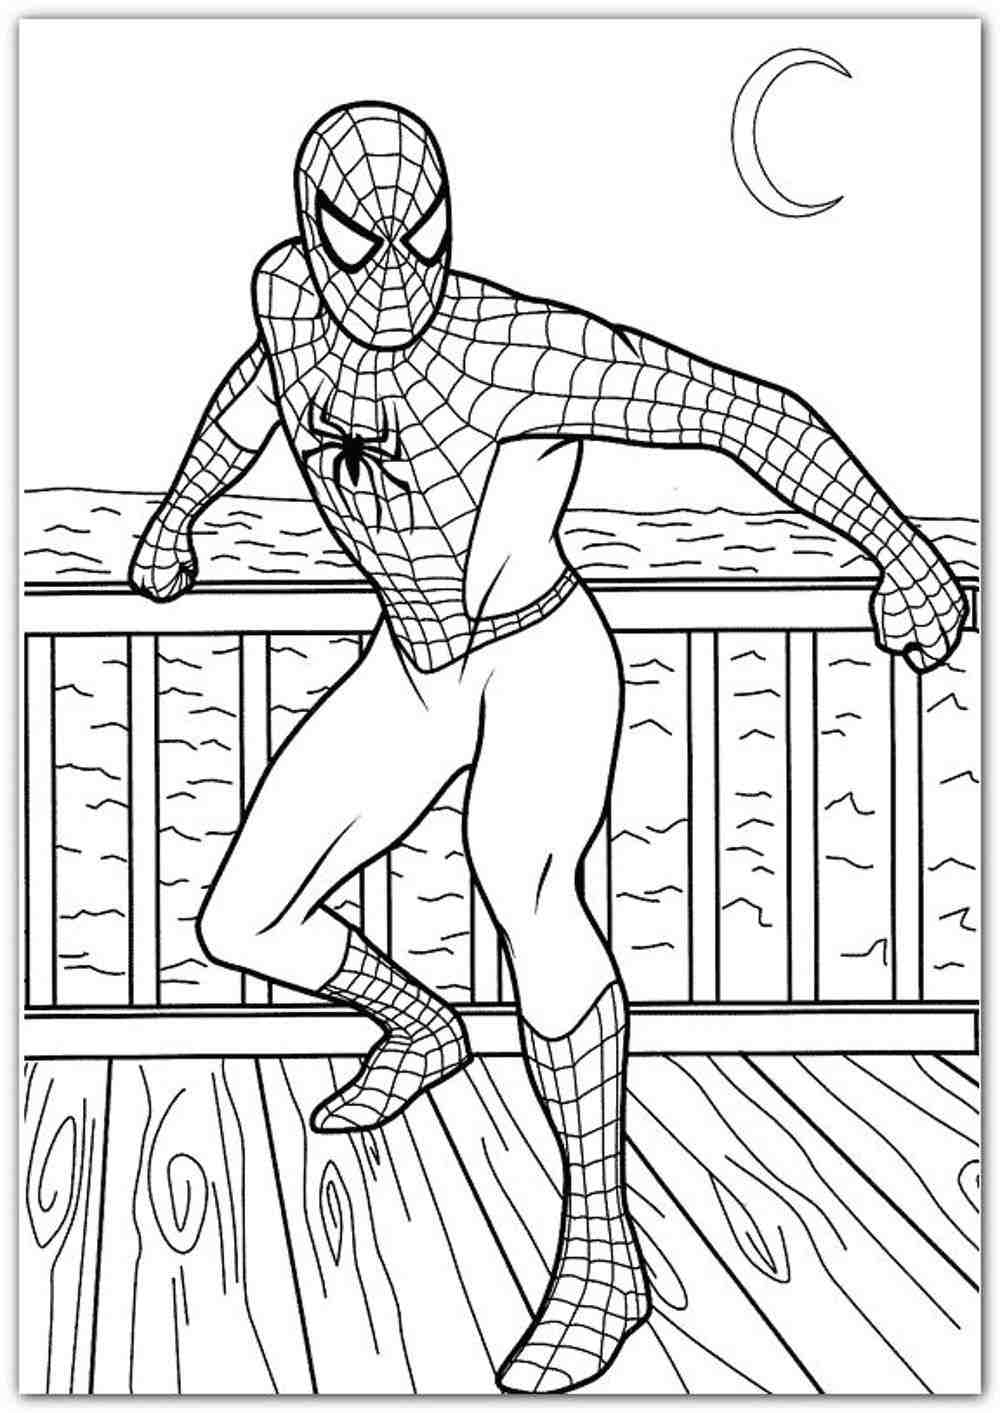 Print & Download Spiderman Coloring Pages An Enjoyable Way to Learn